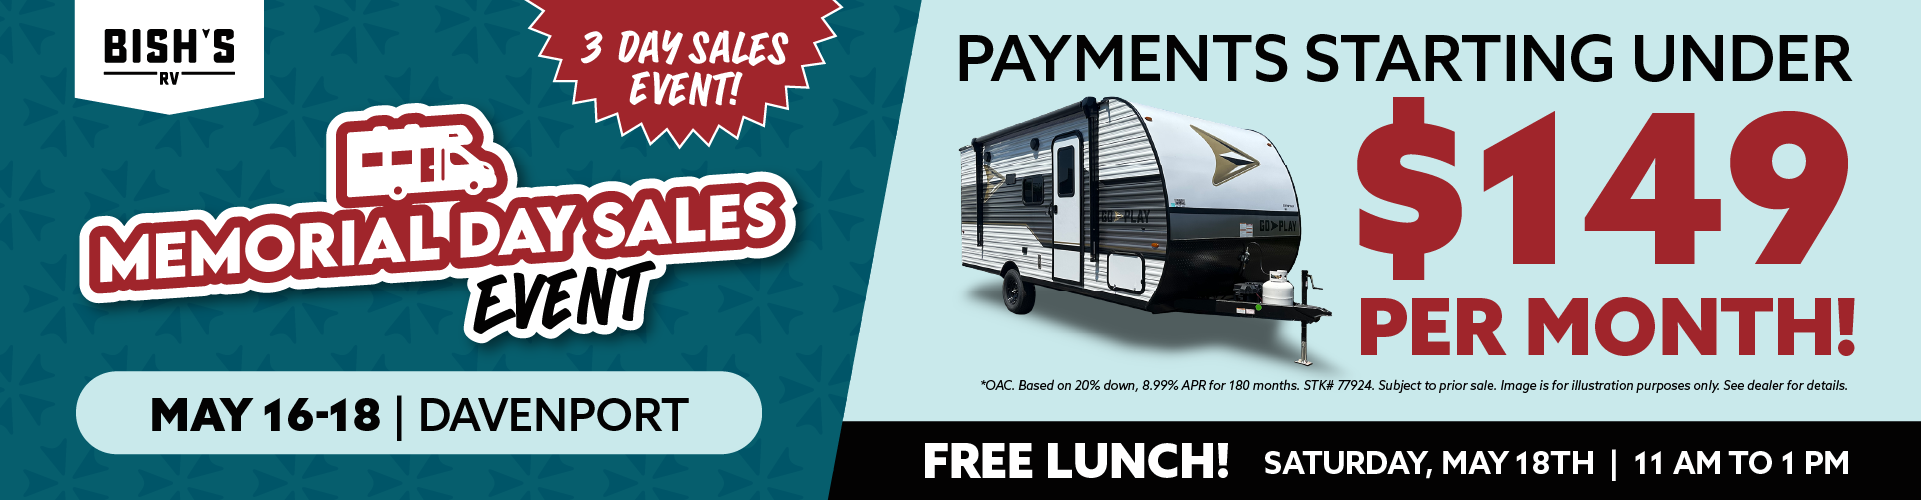 Memorial Day Sales Event - May 16-18 - Bish's RV of Davenport, IA